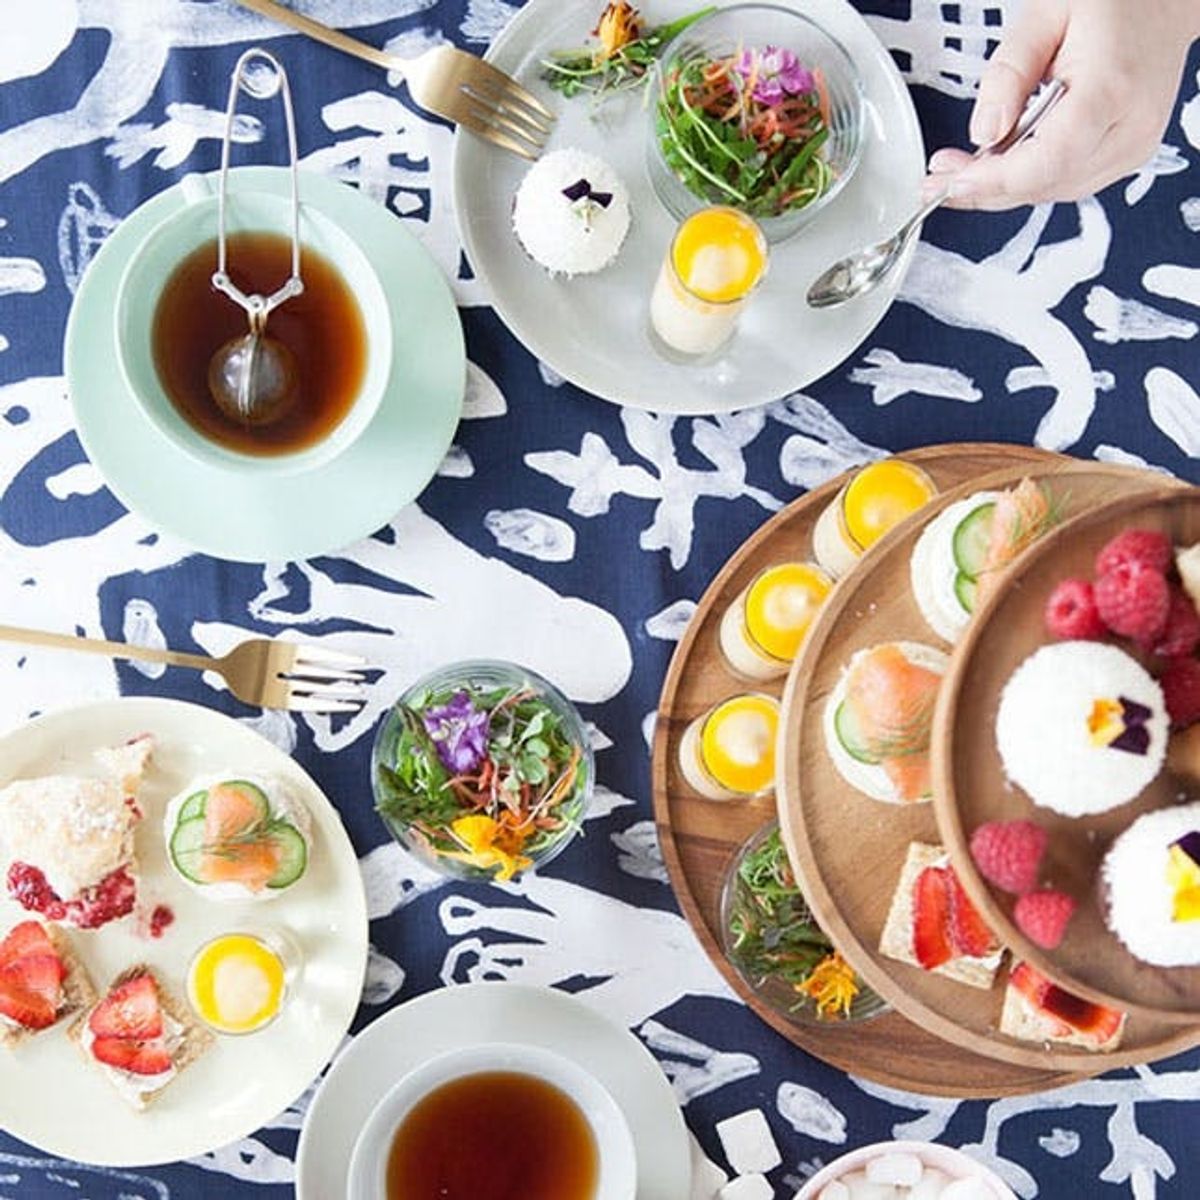 This Is the Most Pinnable Tea Party You’ll Ever Attend